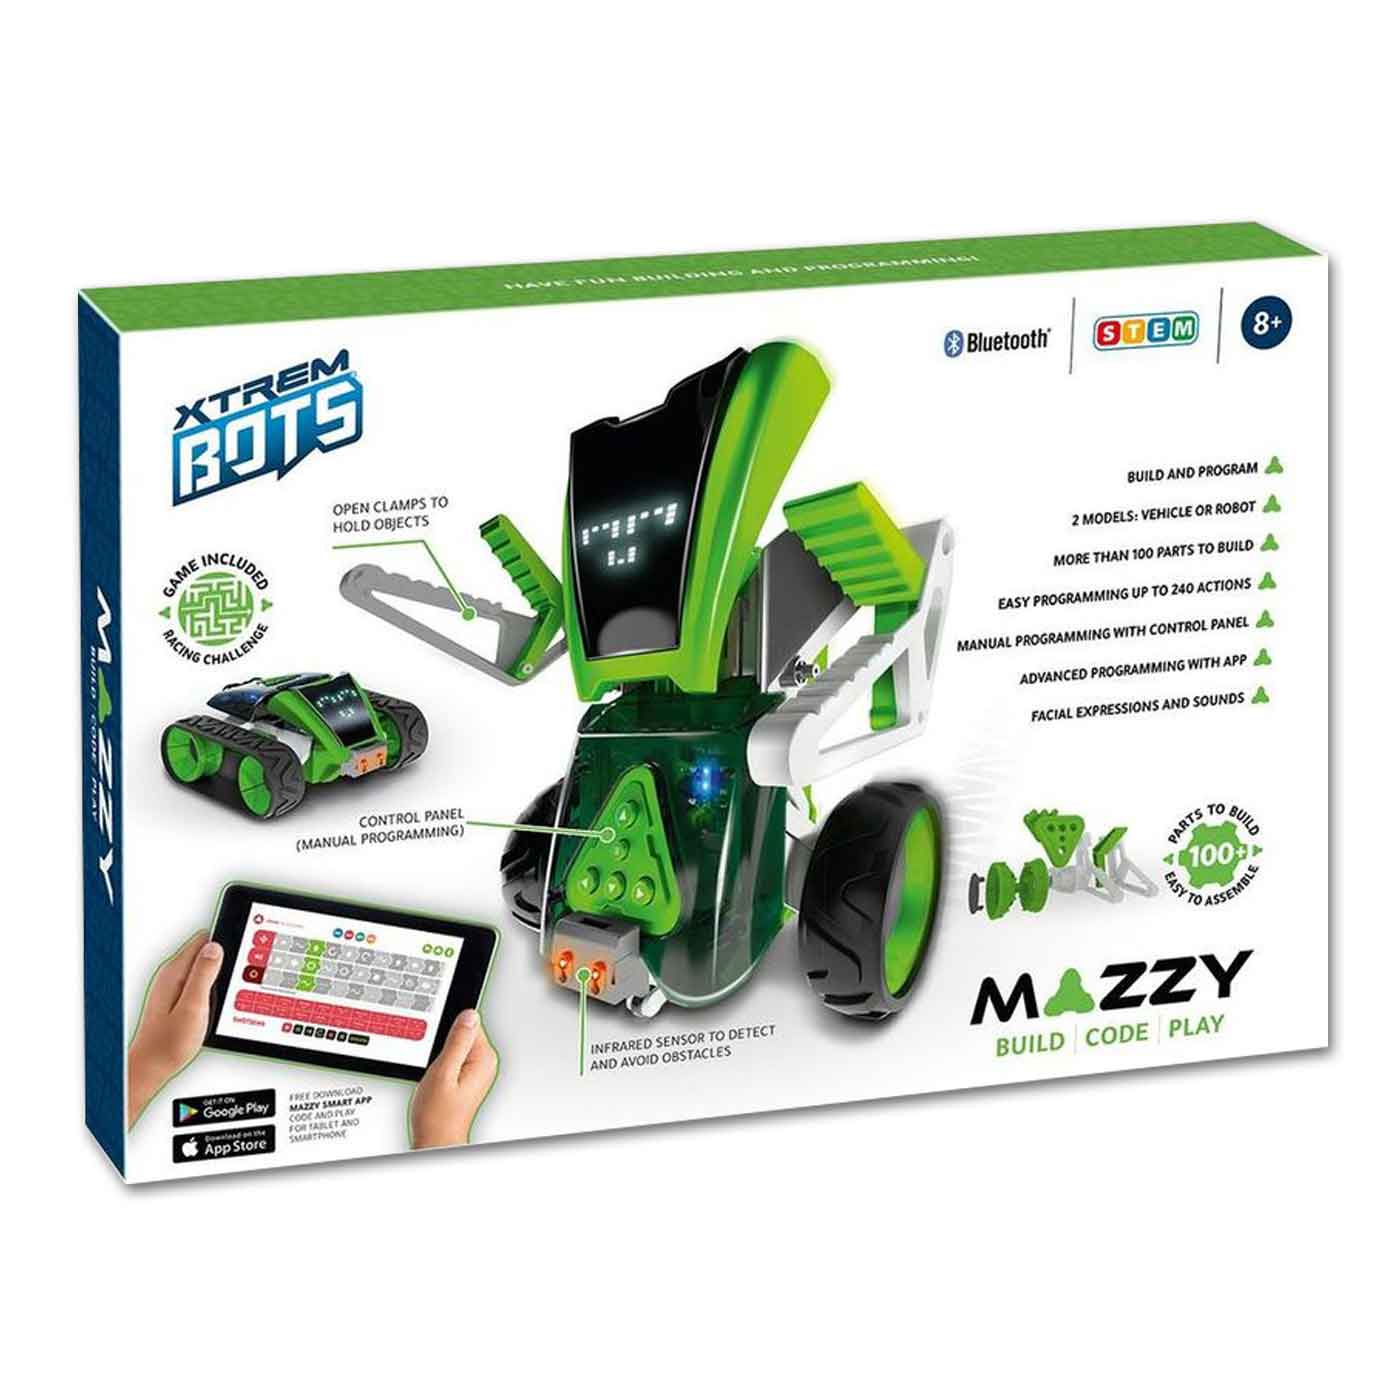 Xtreme Robot Educational Mazzy Bots Kit with Bluetooth Technology